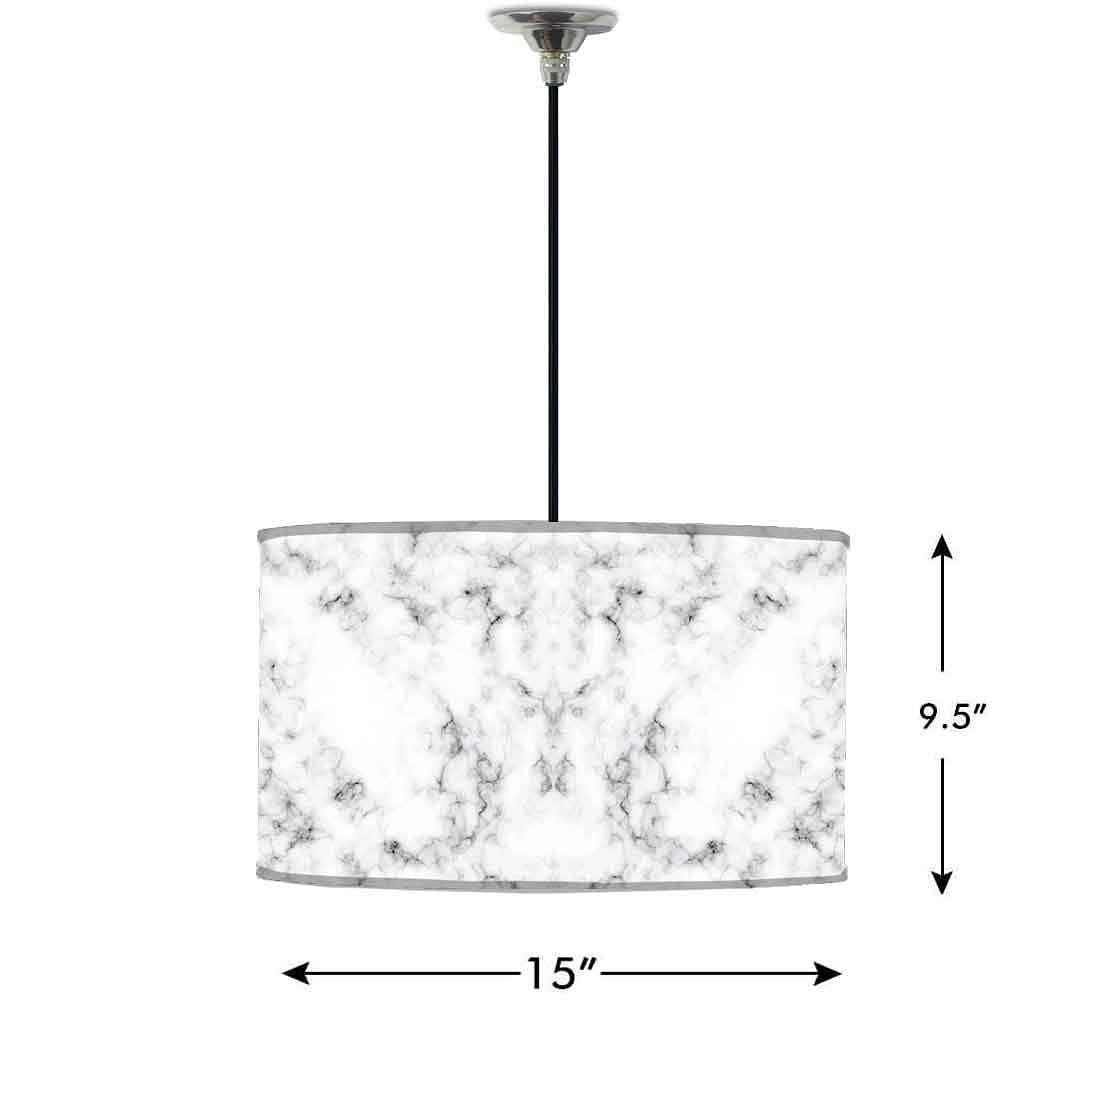 Ceiling Lamp Hanging Drum Lampshade - White and Black Marble Pastle Nutcase